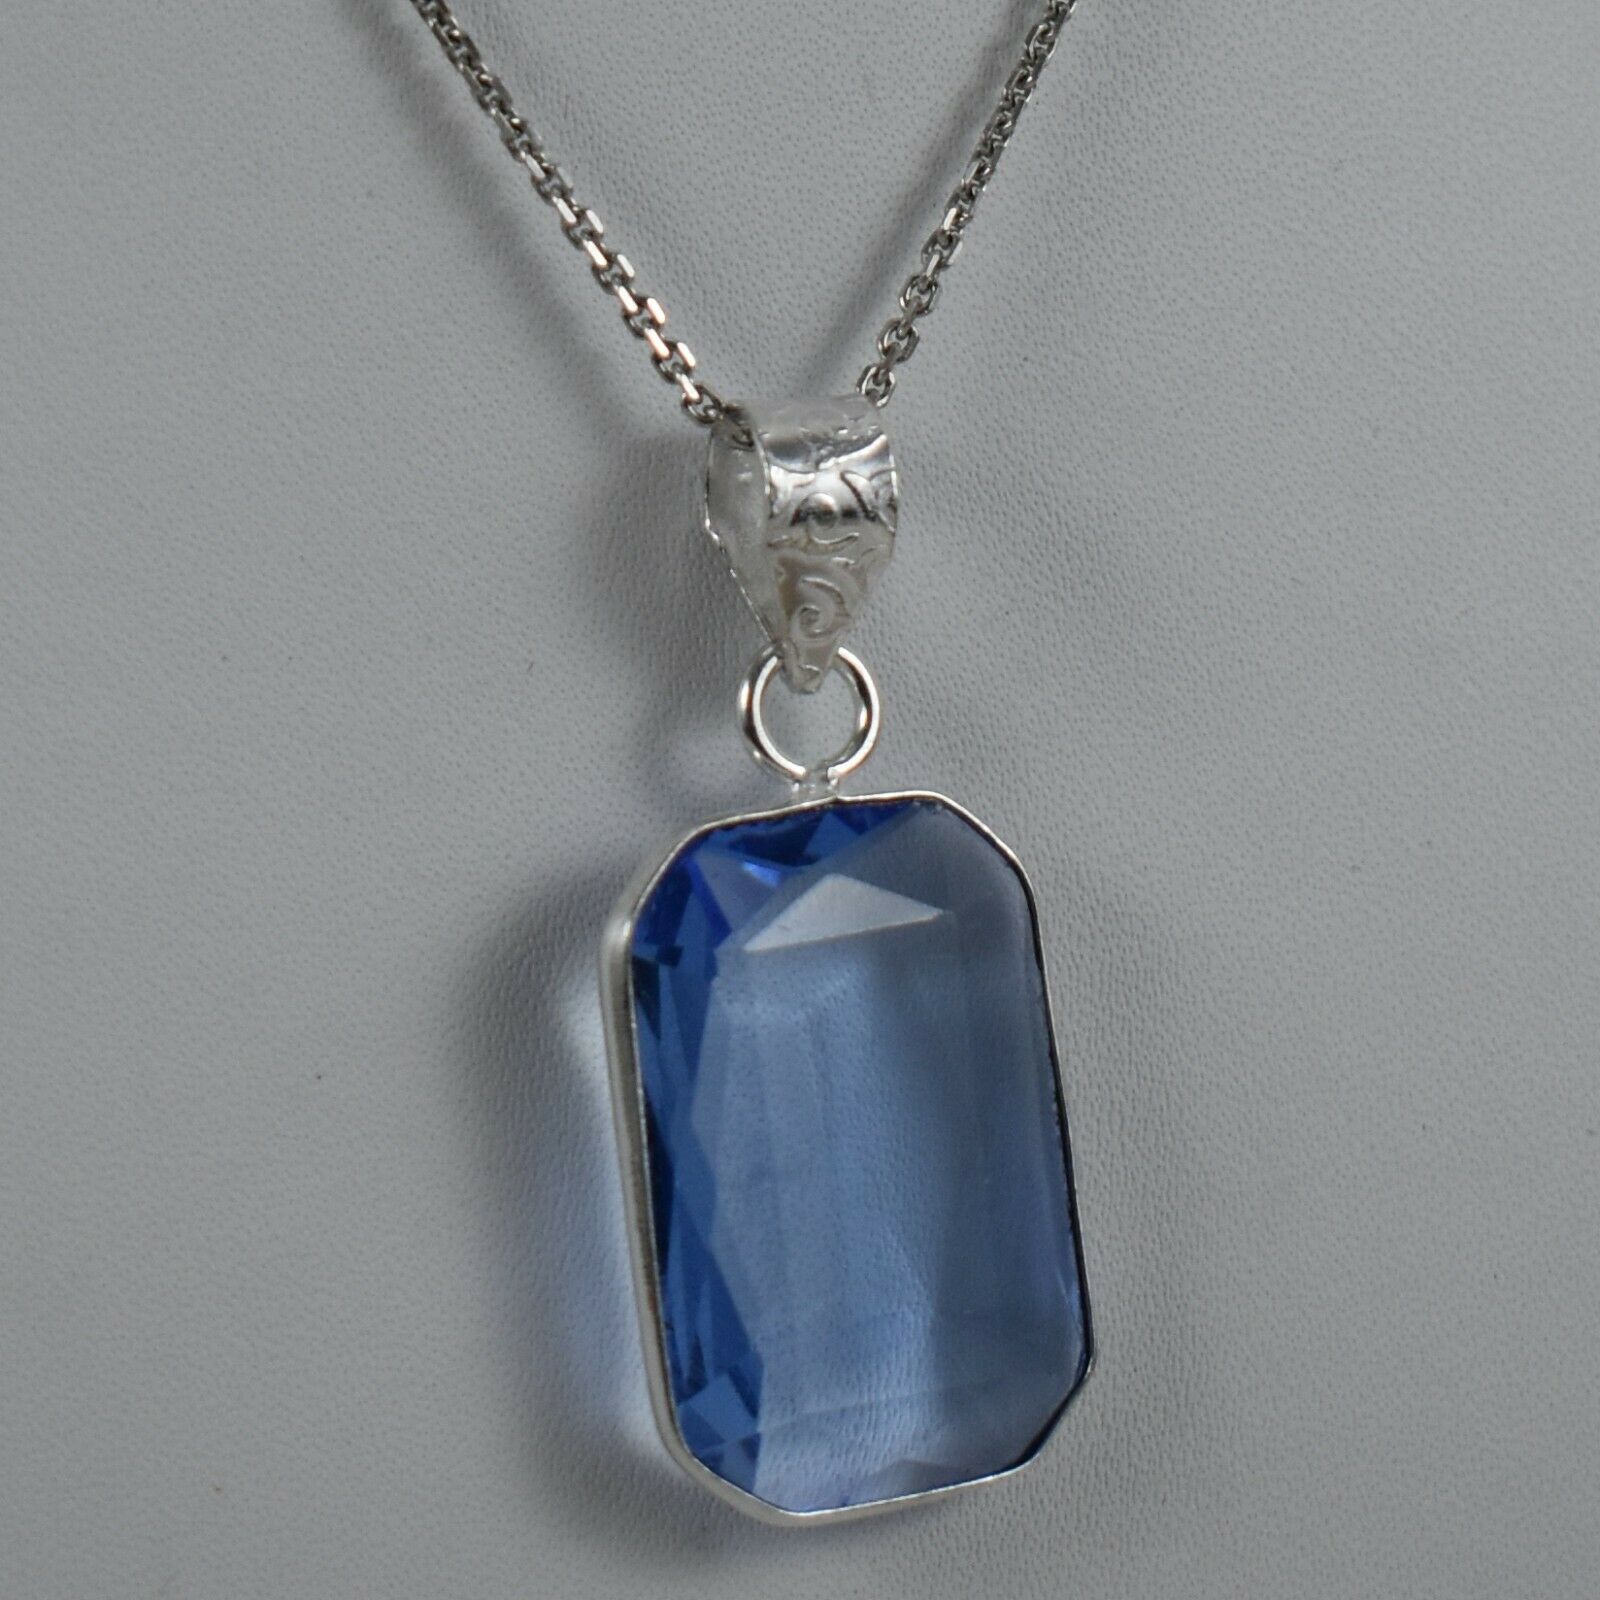 Primary image for 925 Sterling Silver Blue Glass Gemstone Handmade Pendant Women Her Gift PS-2305